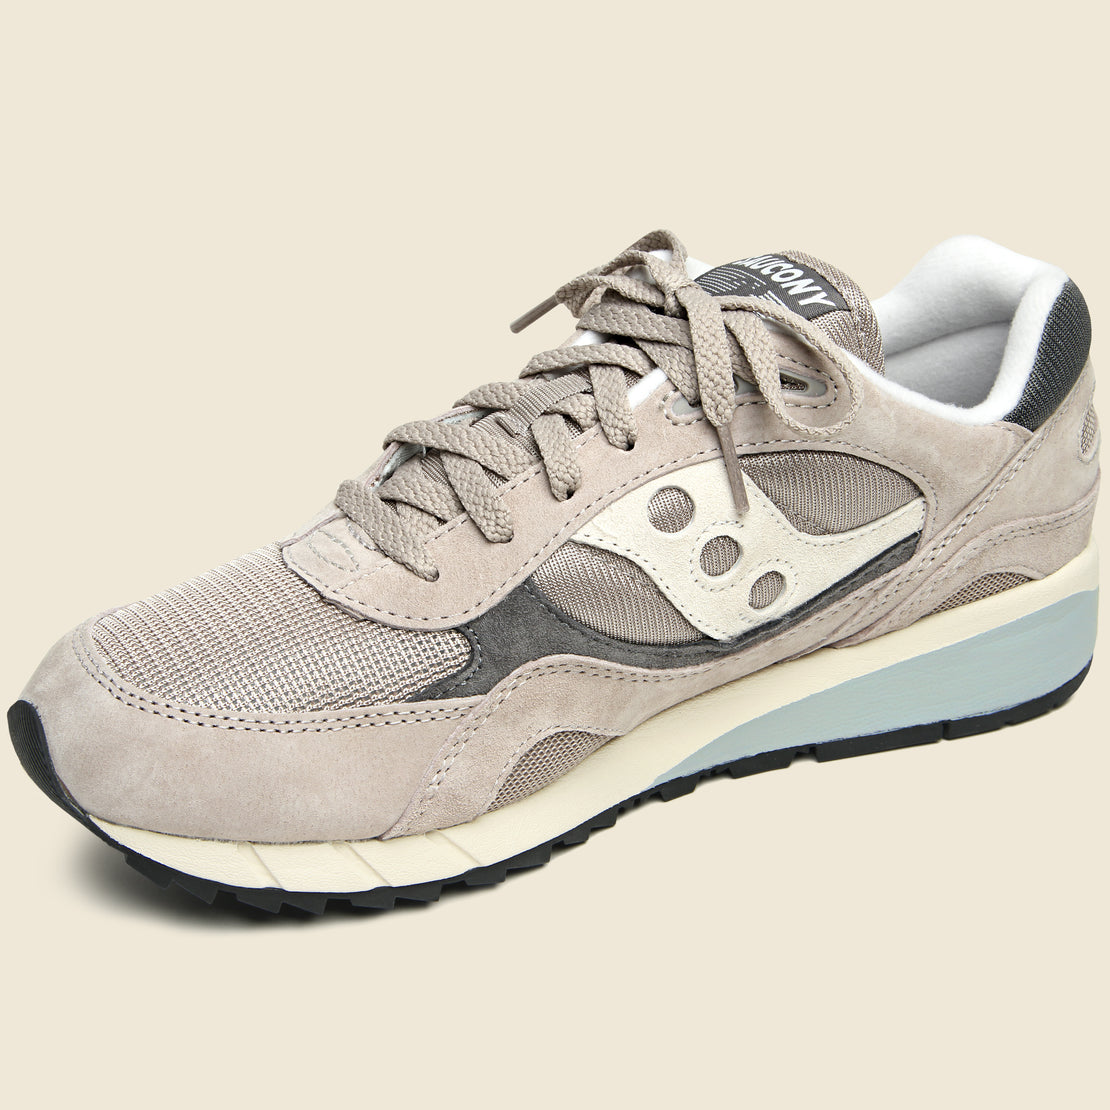 Shadow 6000 Sneaker - Grey/Grey - Saucony - STAG Provisions - Shoes - Athletic